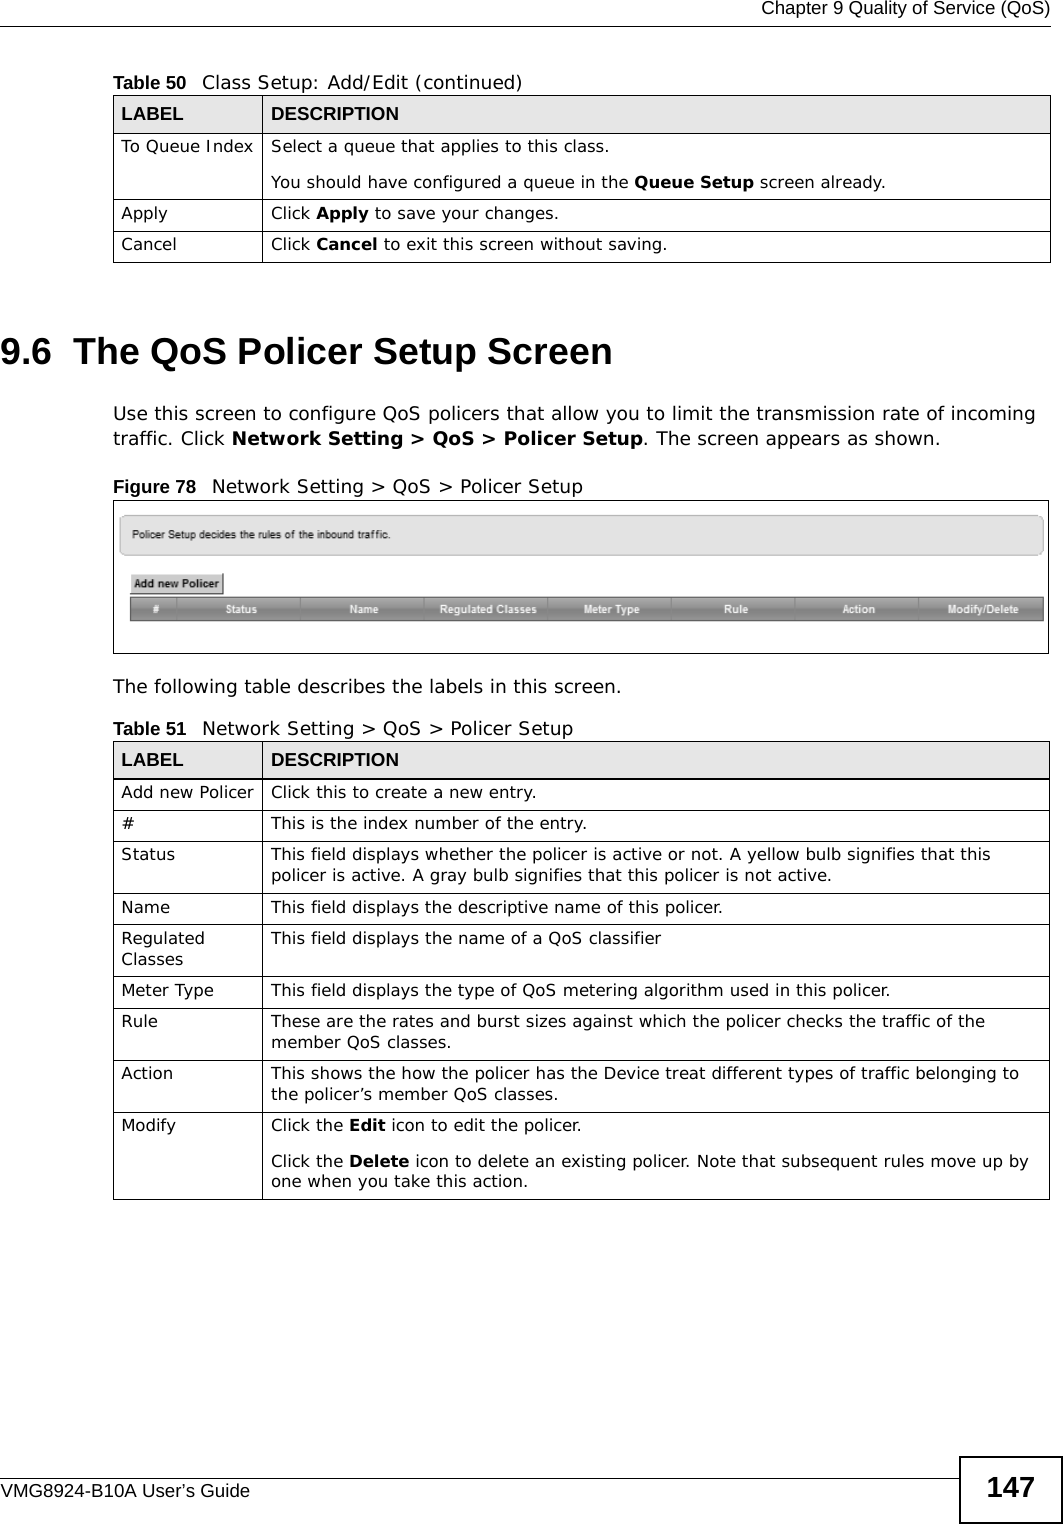  Chapter 9 Quality of Service (QoS)VMG8924-B10A User’s Guide 1479.6  The QoS Policer Setup ScreenUse this screen to configure QoS policers that allow you to limit the transmission rate of incoming traffic. Click Network Setting &gt; QoS &gt; Policer Setup. The screen appears as shown. Figure 78   Network Setting &gt; QoS &gt; Policer Setup The following table describes the labels in this screen.  To Queue Index Select a queue that applies to this class.You should have configured a queue in the Queue Setup screen already.Apply Click Apply to save your changes.Cancel Click Cancel to exit this screen without saving.Table 50   Class Setup: Add/Edit (continued)LABEL DESCRIPTIONTable 51   Network Setting &gt; QoS &gt; Policer SetupLABEL DESCRIPTIONAdd new Policer Click this to create a new entry.#This is the index number of the entry.Status This field displays whether the policer is active or not. A yellow bulb signifies that this policer is active. A gray bulb signifies that this policer is not active.Name This field displays the descriptive name of this policer.Regulated Classes This field displays the name of a QoS classifierMeter Type This field displays the type of QoS metering algorithm used in this policer.Rule These are the rates and burst sizes against which the policer checks the traffic of the member QoS classes.Action This shows the how the policer has the Device treat different types of traffic belonging to the policer’s member QoS classes.Modify Click the Edit icon to edit the policer.Click the Delete icon to delete an existing policer. Note that subsequent rules move up by one when you take this action.